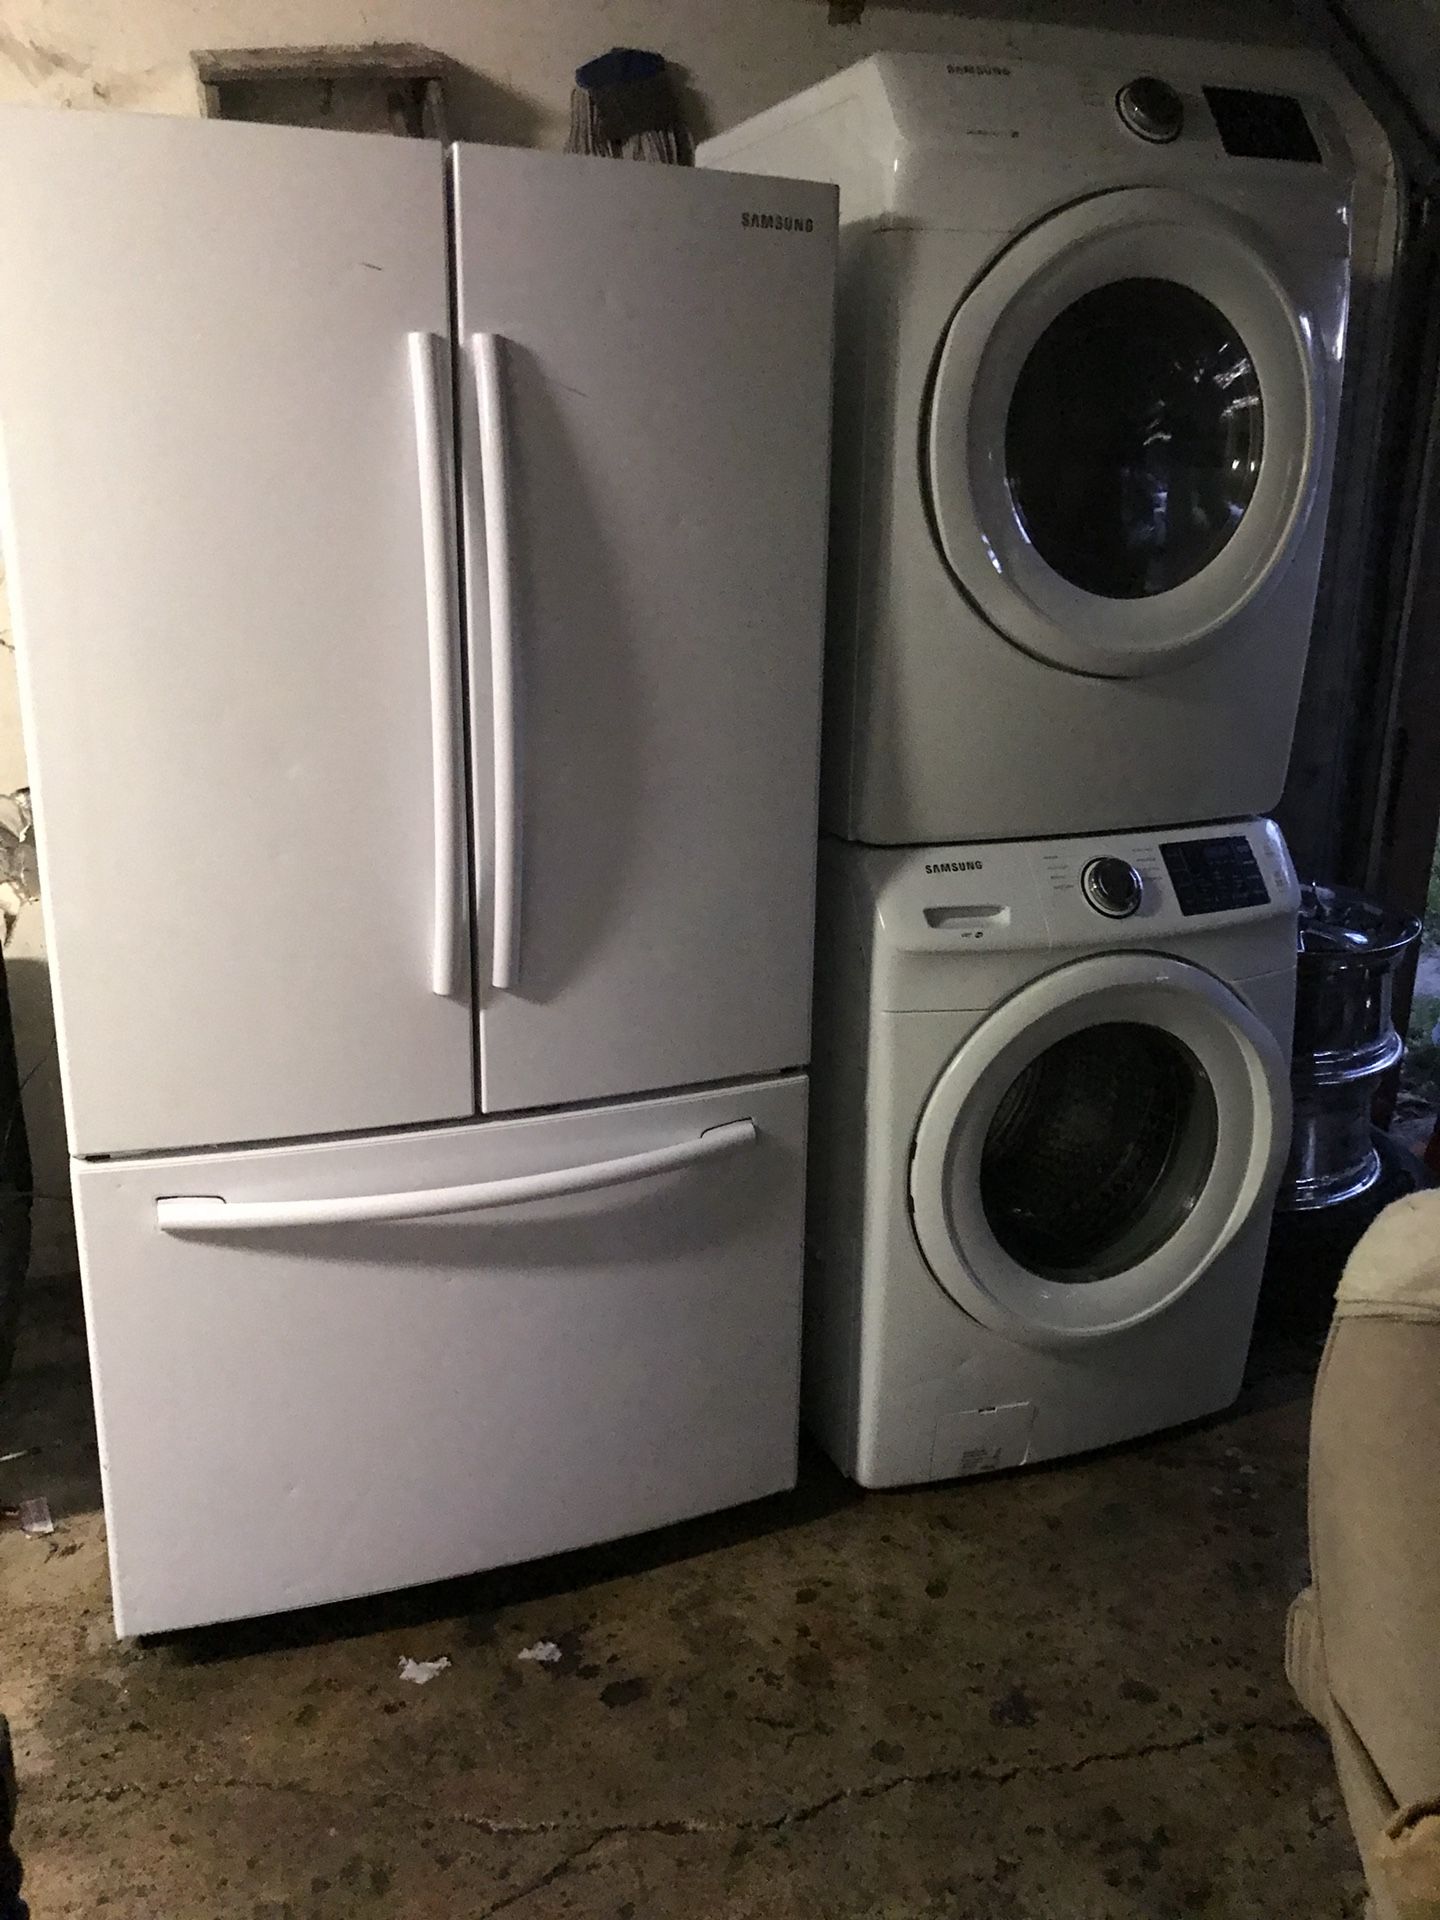 Samsung Refrigerator and washer and dryer